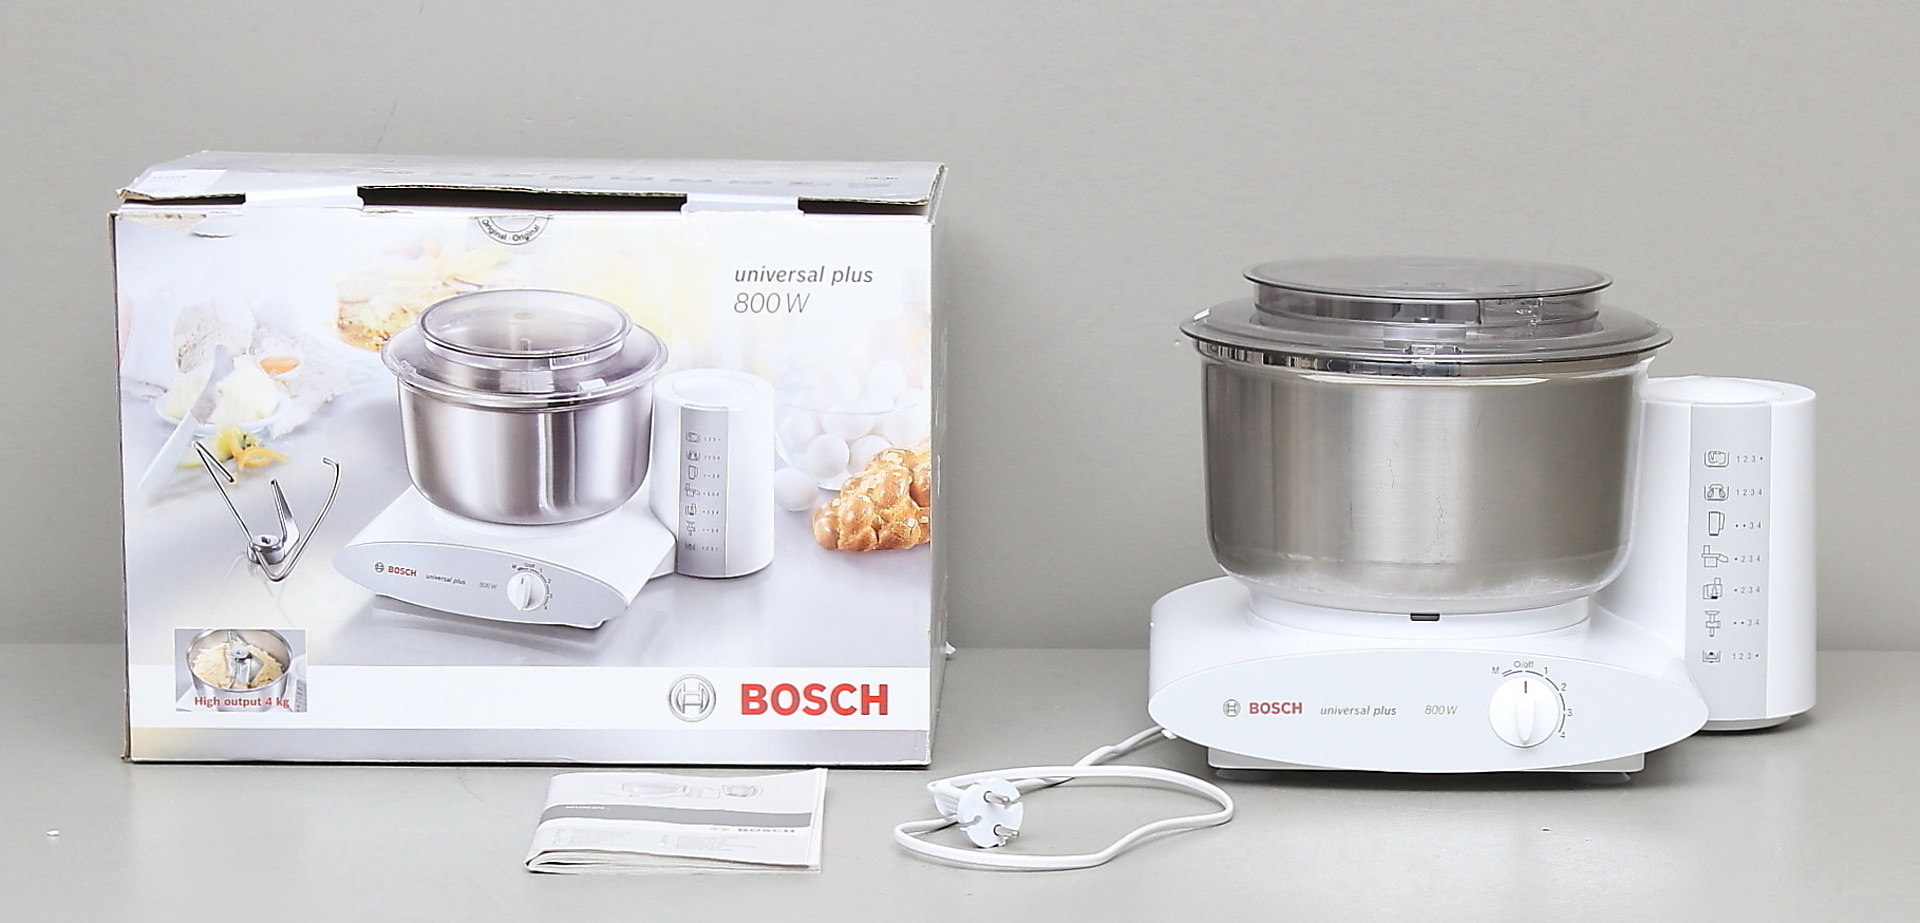 Bosch Blender Attachment for Bosch Universal Plus Mixer | Ideal Mixer  Accessory for Blending Bread, Fruit, Ice | TRITAN Co-polyester with  Stainless